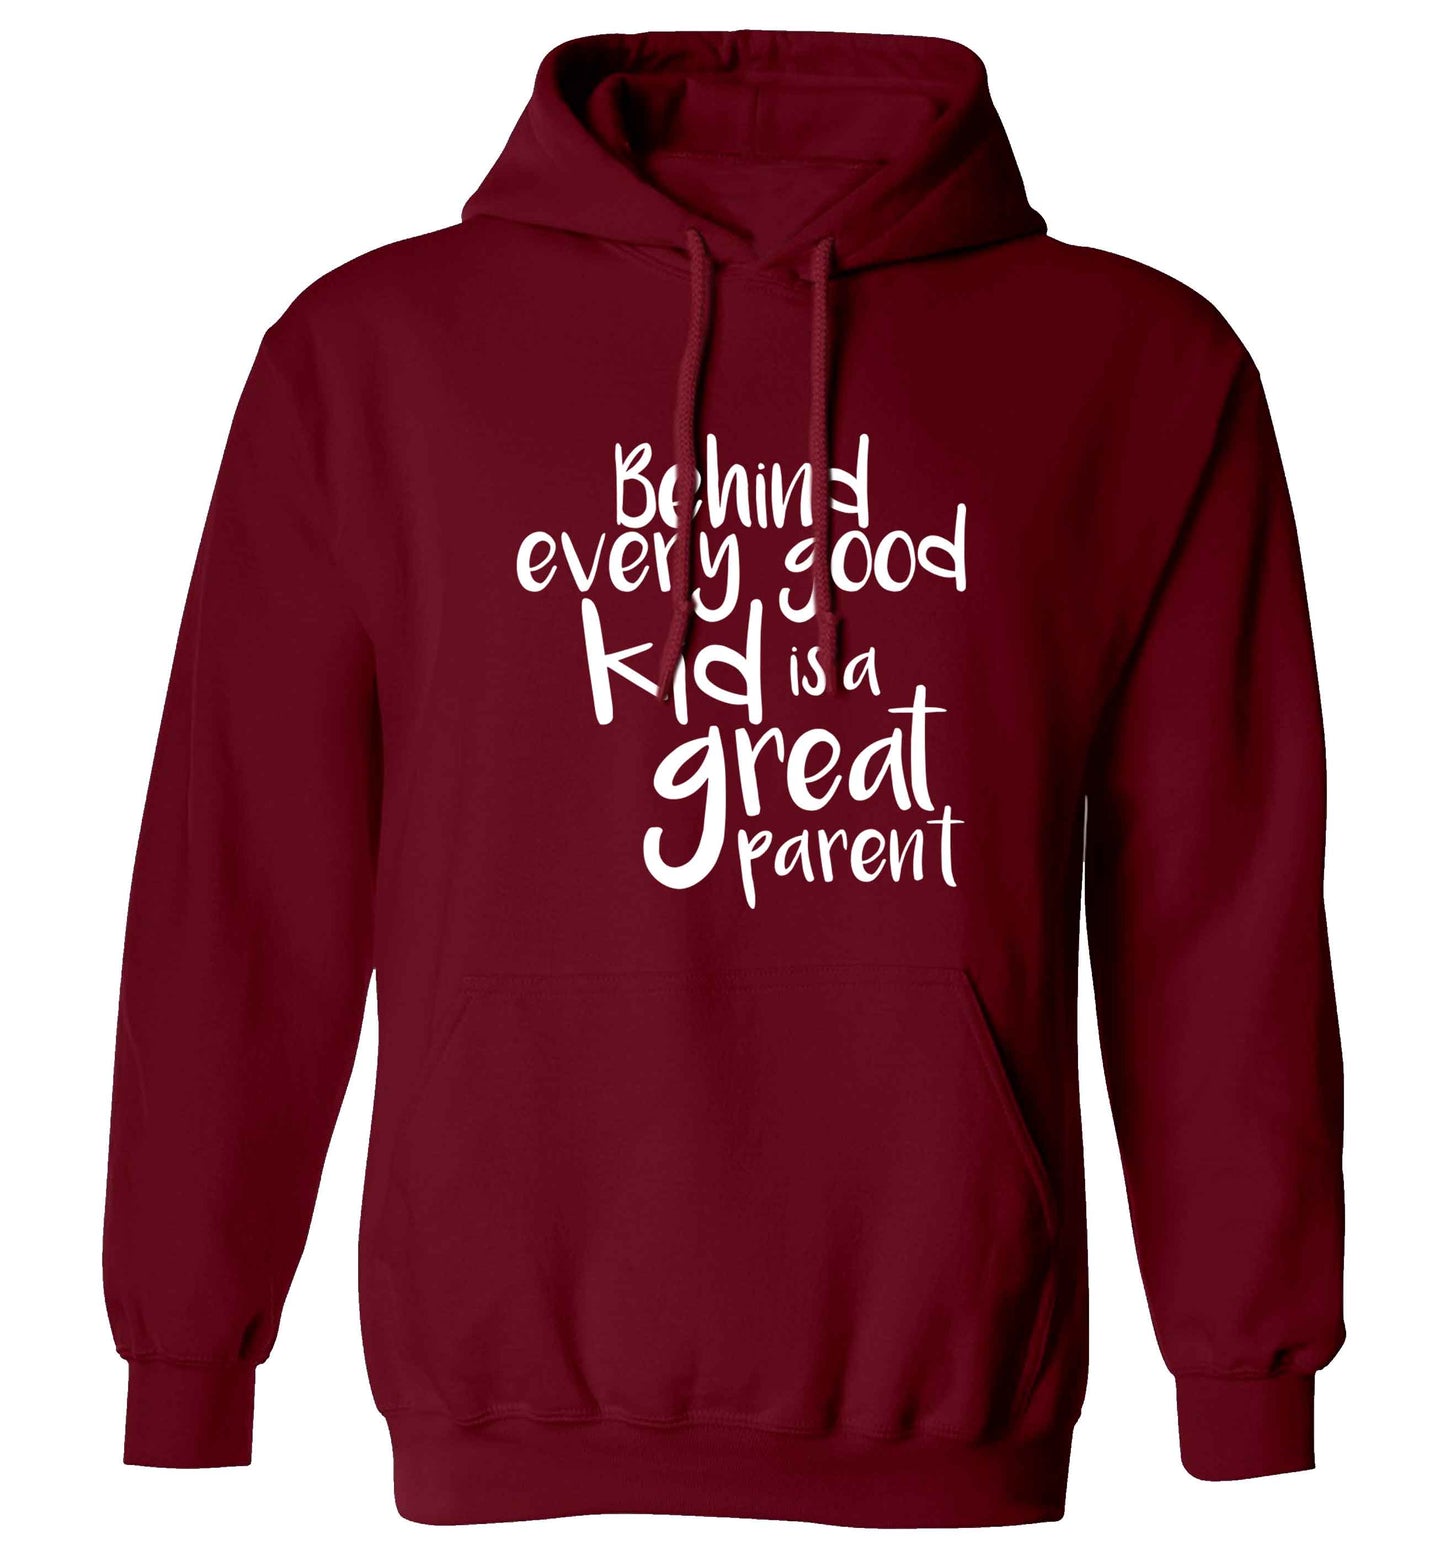 Behind every good kid is a great parent adults unisex maroon hoodie 2XL